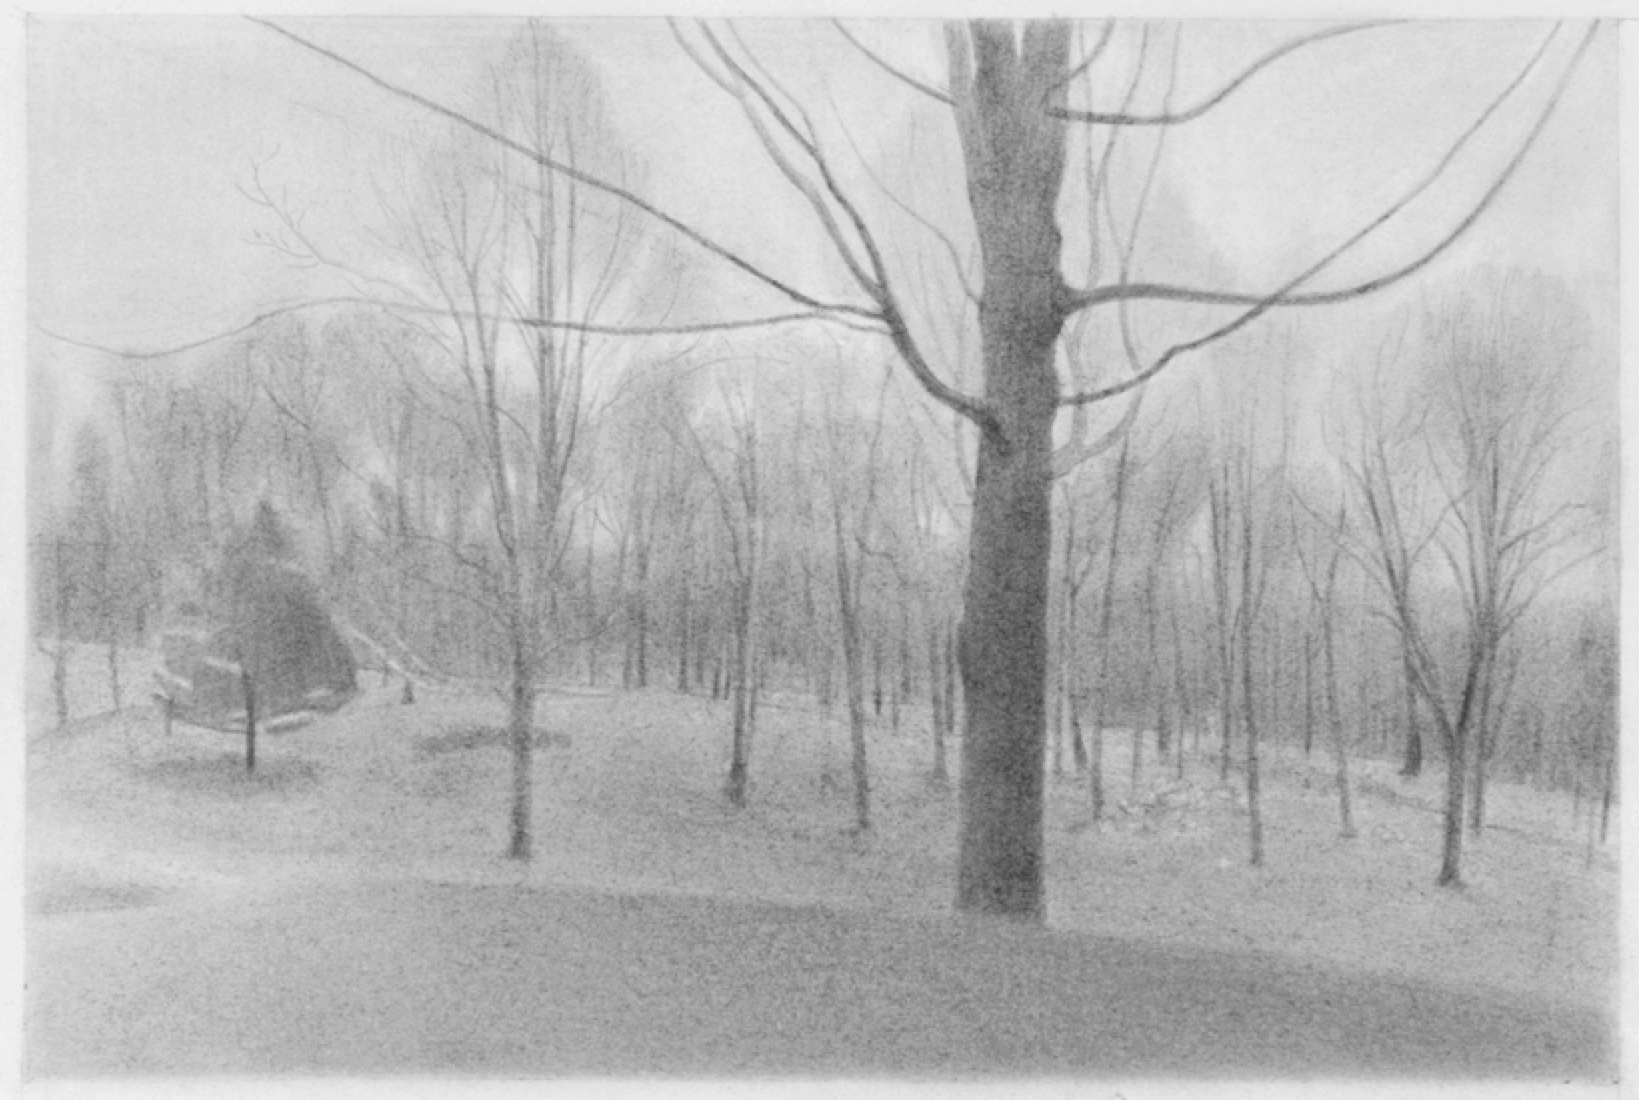 Ron Milewicz, Maple and Cedar, 2017, pencil on paper, 12 x 18 inches